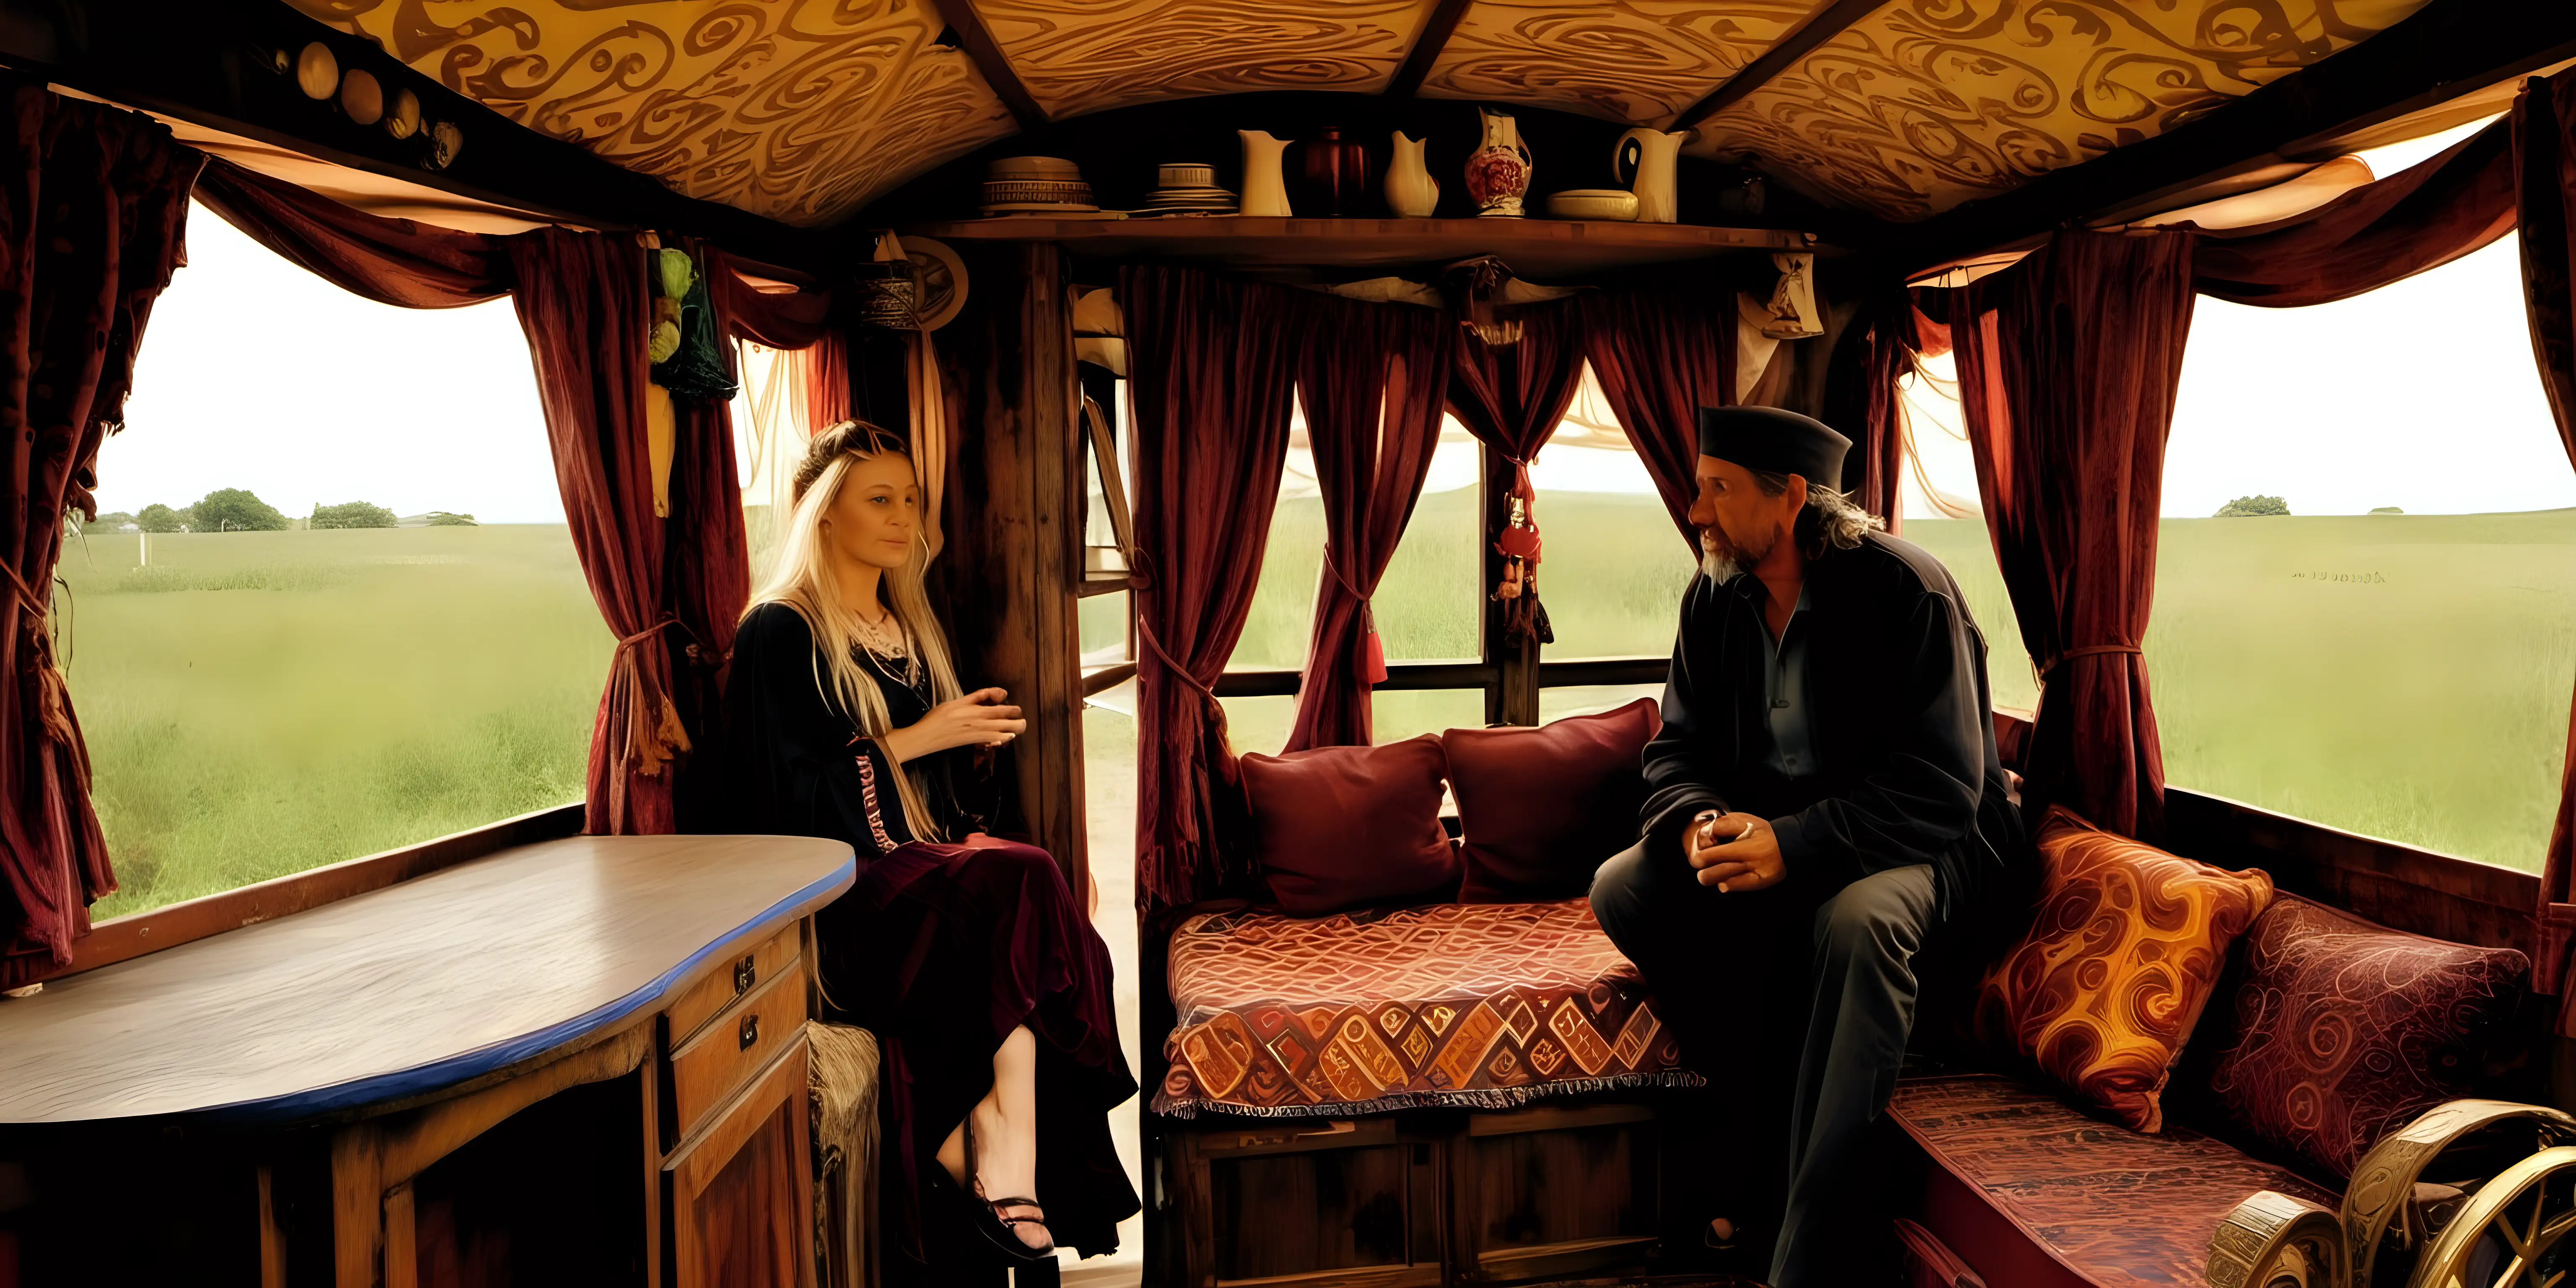 inside a bohemian gypsy wagon, there ia an open window with tapestry curtains  tied back on eithert side of the open window, there is dark coloured furniture  furniture , a gypsy man & woman are sitting inside the bohemian gypsy wagon, 